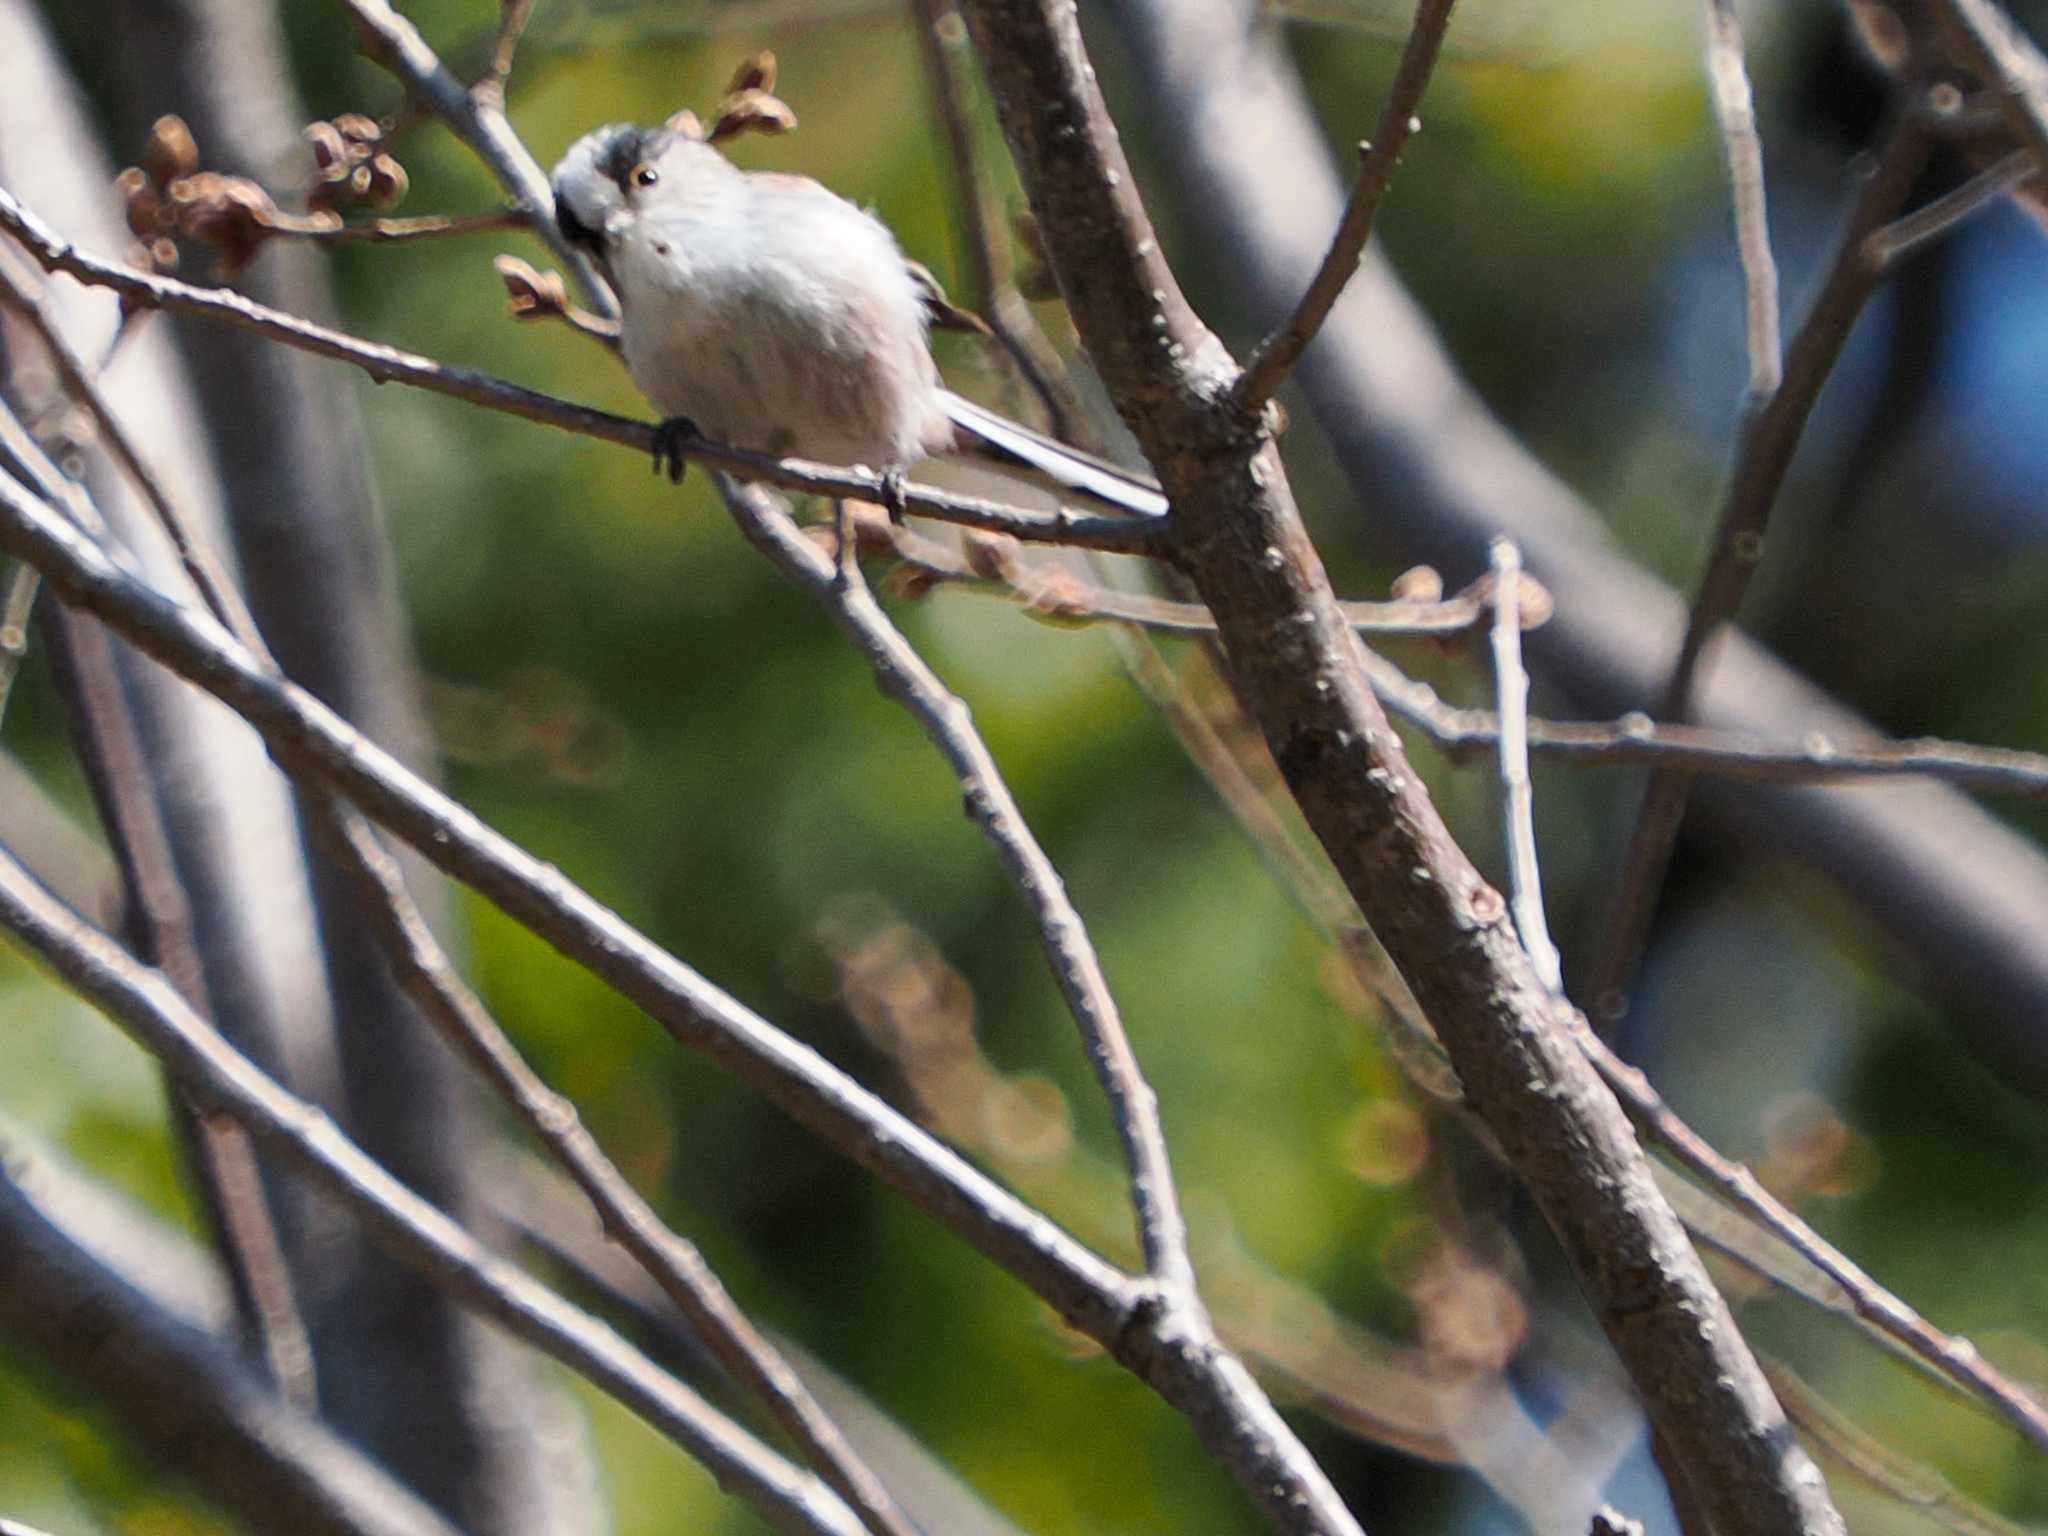 Photo of Long-tailed Tit at Imperial Palace by 98_Ark (98ｱｰｸ)